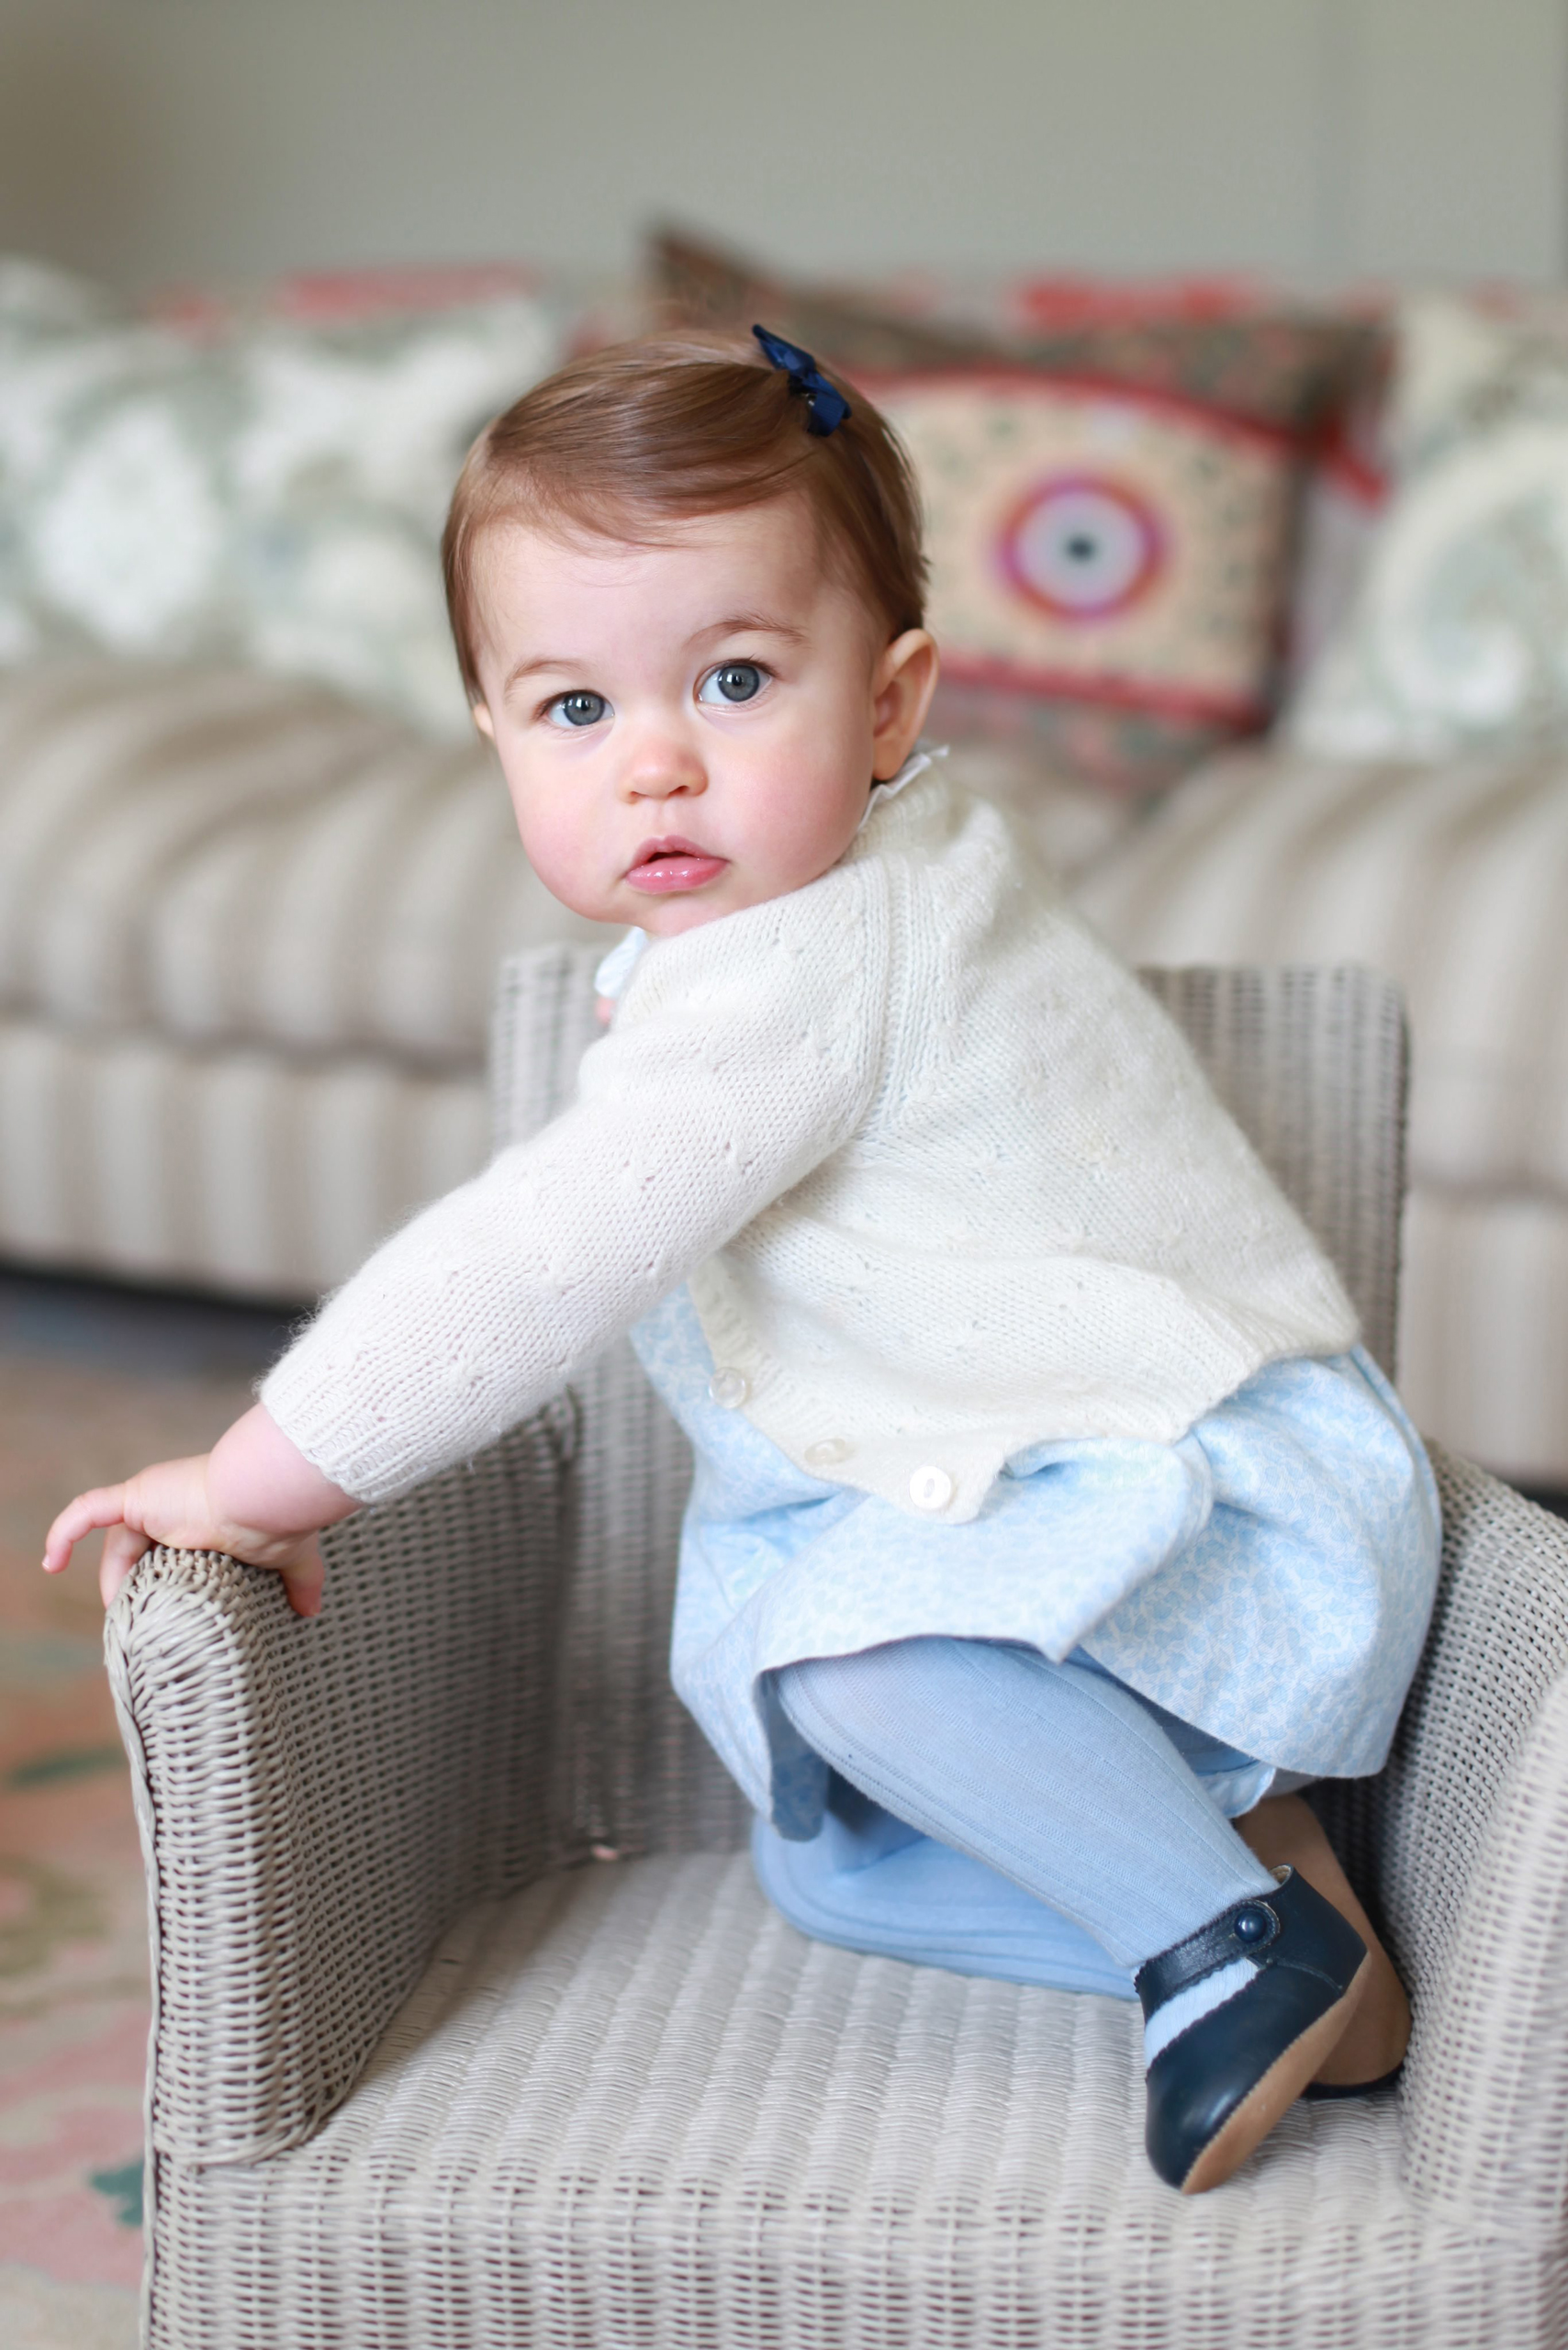 Princess Charlotte at Anmer Hall in Norfolk, U.K., in a photo made available by the Duke and Duchess of Cambridge on May 1, 2016.